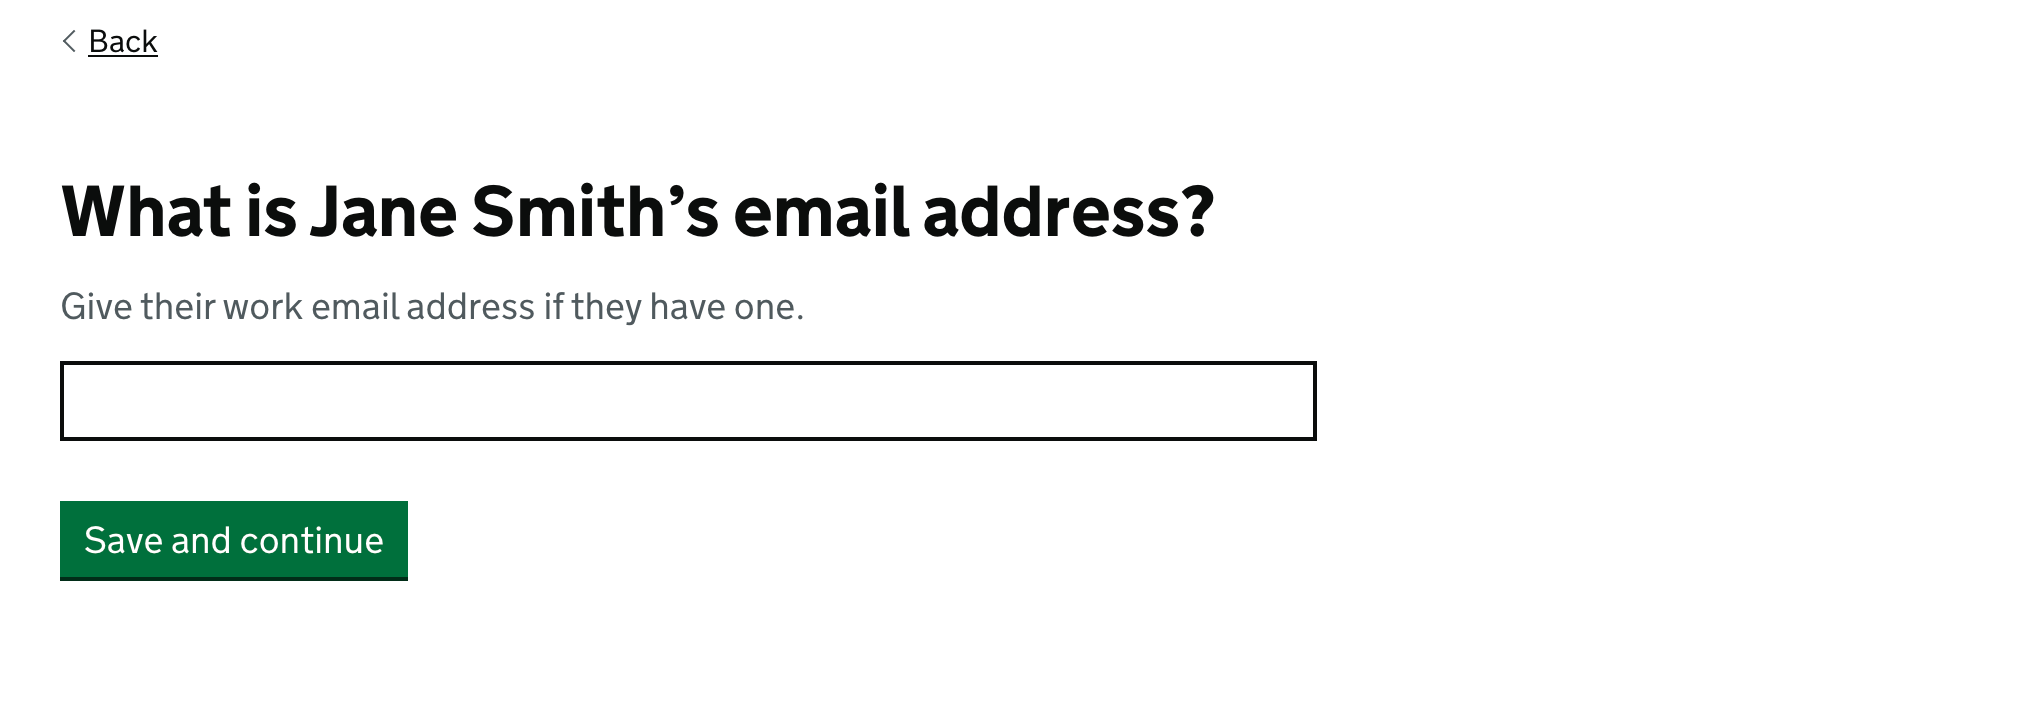 Screenshot showing question: What is Jane Smith’s email address? Give their work email address if they have one.